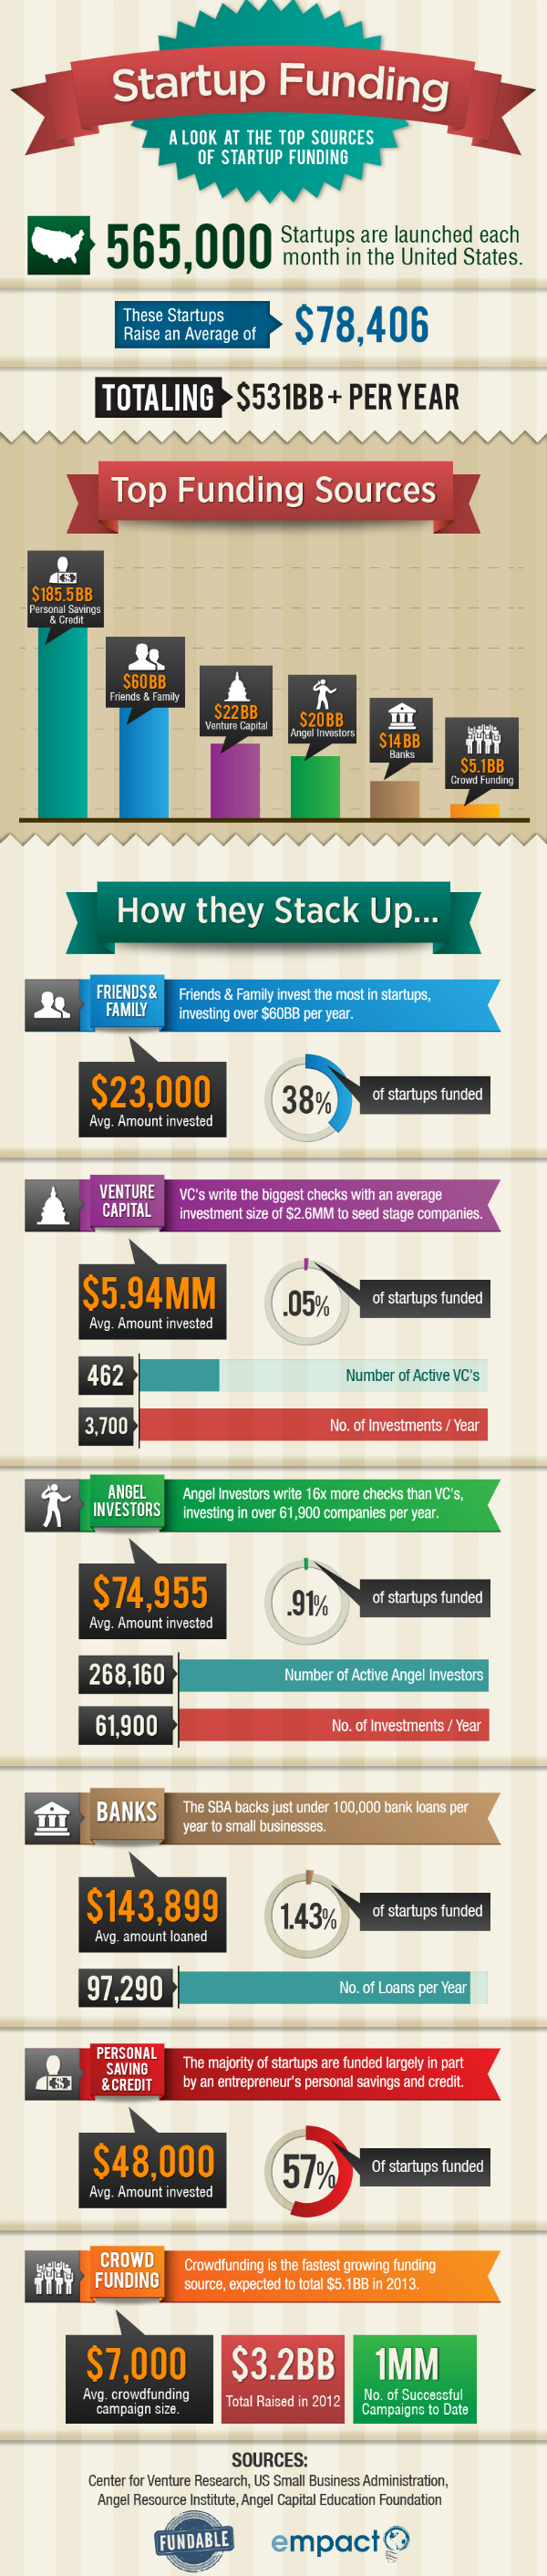 startup-funding-infographic